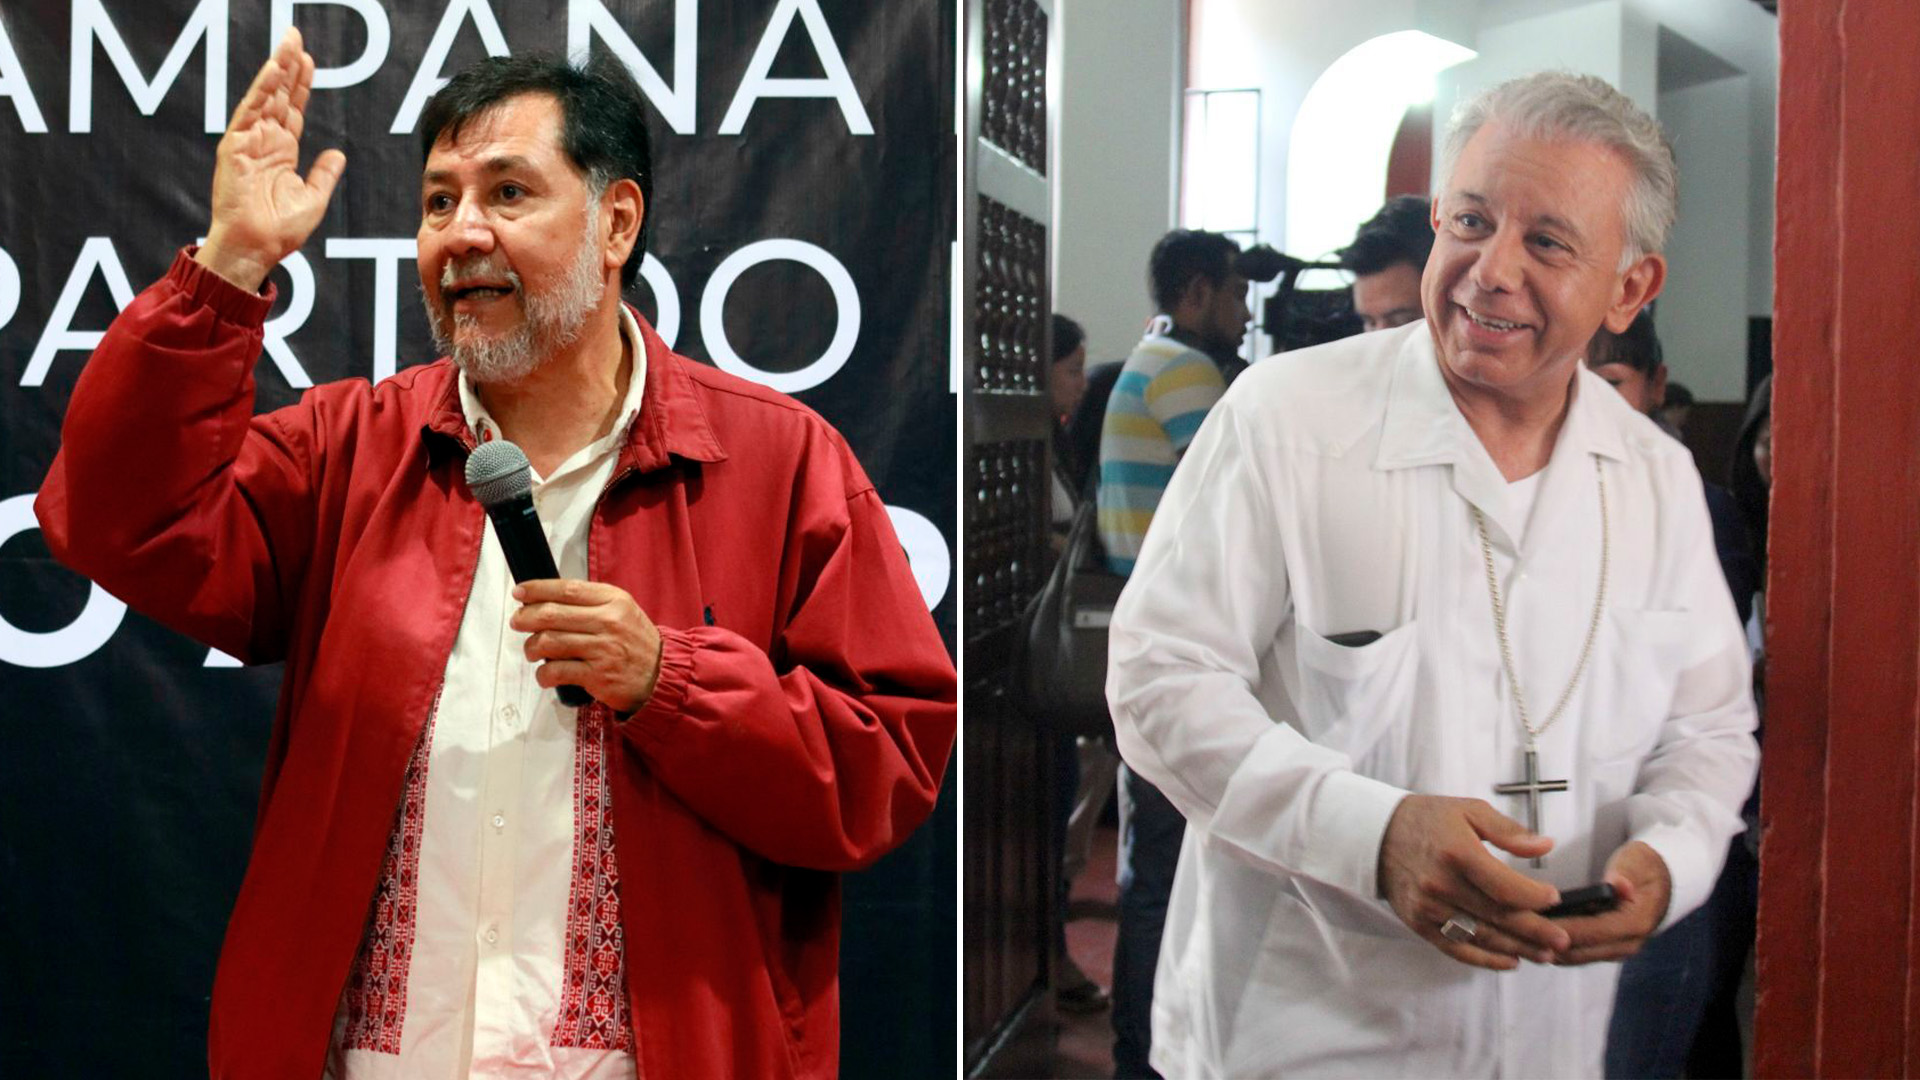 Noroña told the bishop of Cuernavaca to better solve the problem of pederasty in the church (Photos: Cuartoscuro)